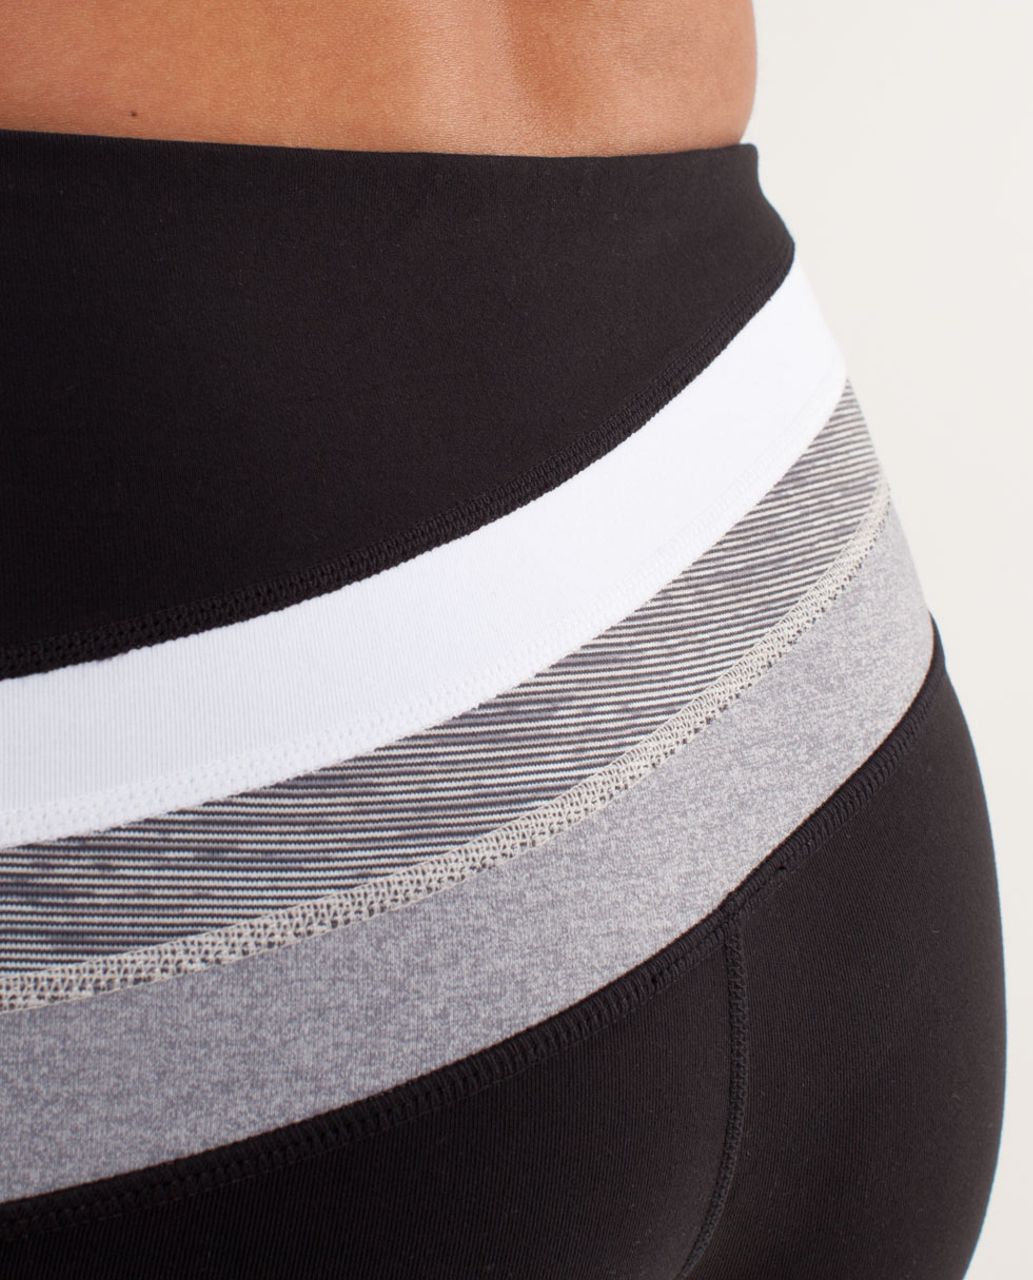 Lululemon Retro Rainbow Crop - Black /  White /  Wee Are From Space Coal Fossil